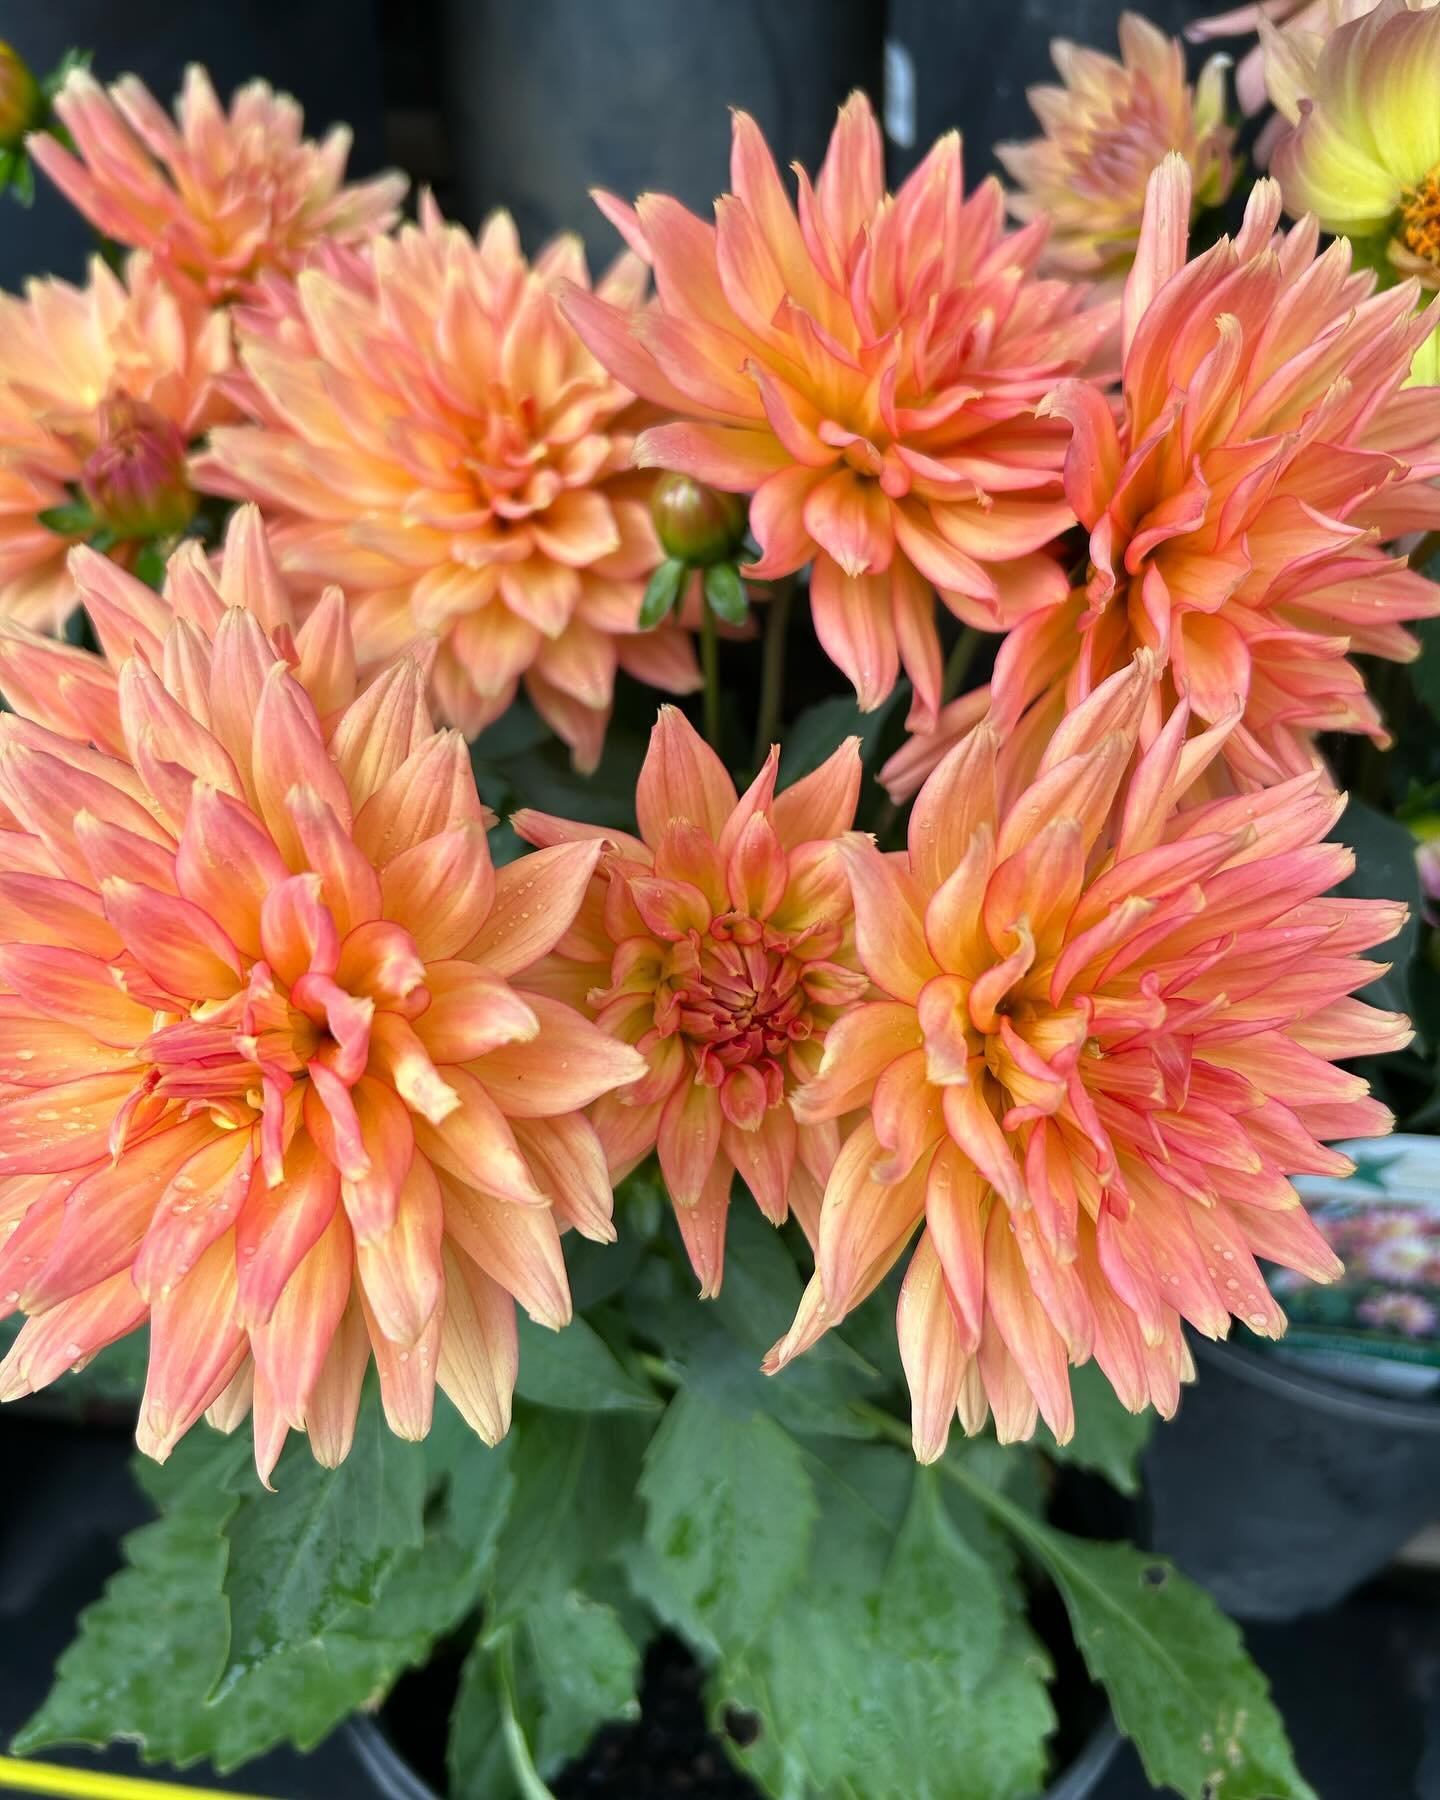 ☀️Don&rsquo;t want to wait for a dahlia bulb to sprout? We have potted dahlias in some lovely colors! 

🎀Don&rsquo;t forget, Mother&rsquo;s Day is coming up. These would make a lovely gift for the garden-loving moms! Ask to have it foil wrapped and 